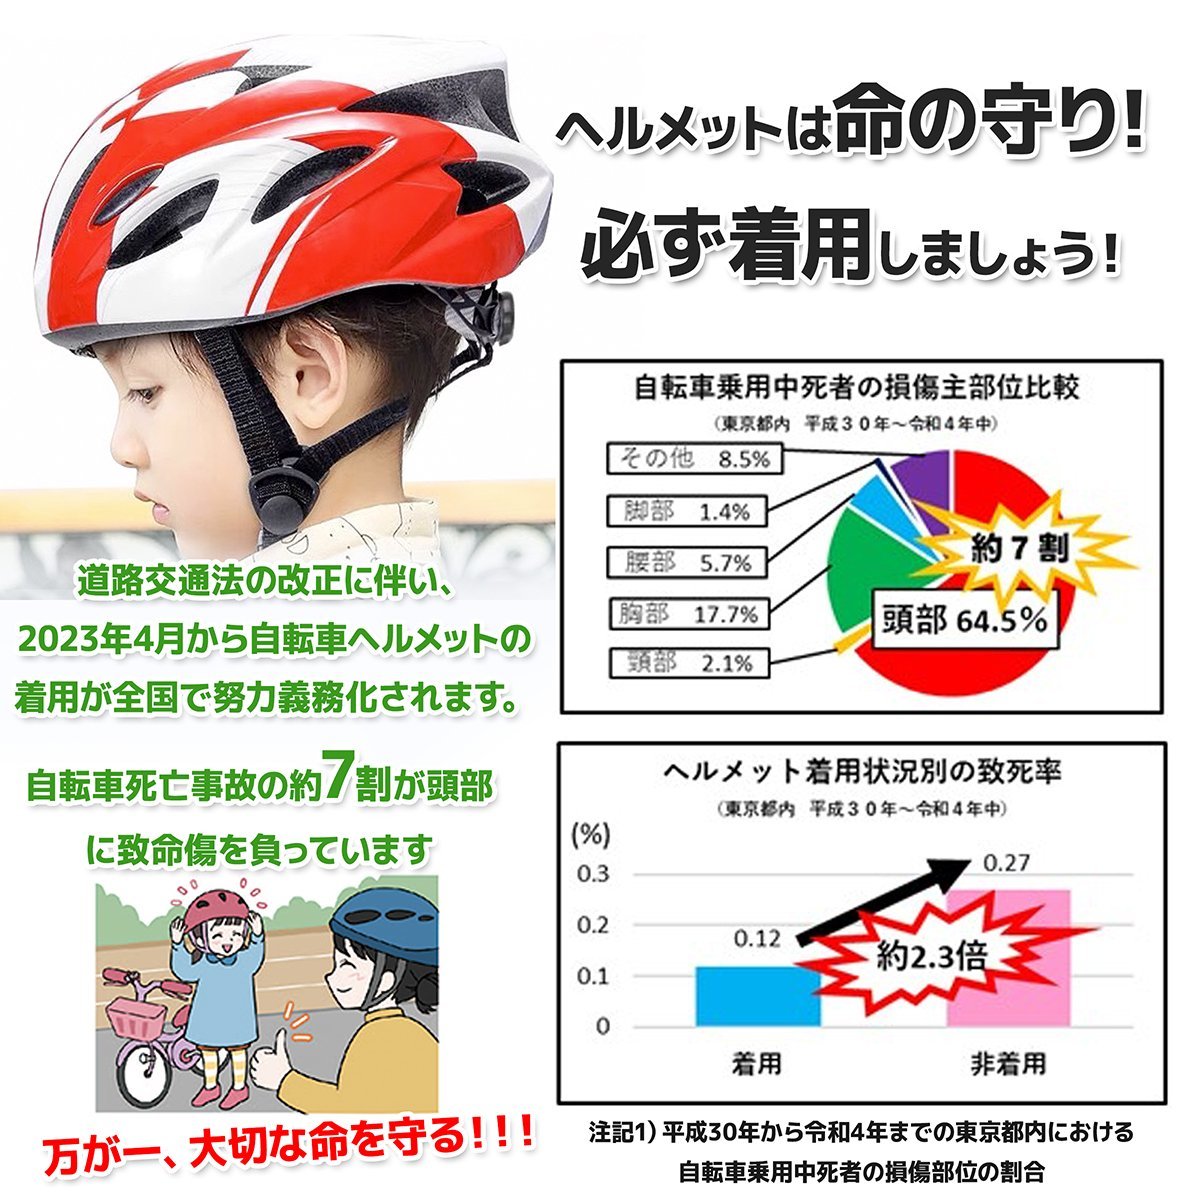 * free shipping CE standard certification stylish . simple . design super light weight street riding oriented helmet for bicycle man woman child from adult till corresponding!4 сolor selection 